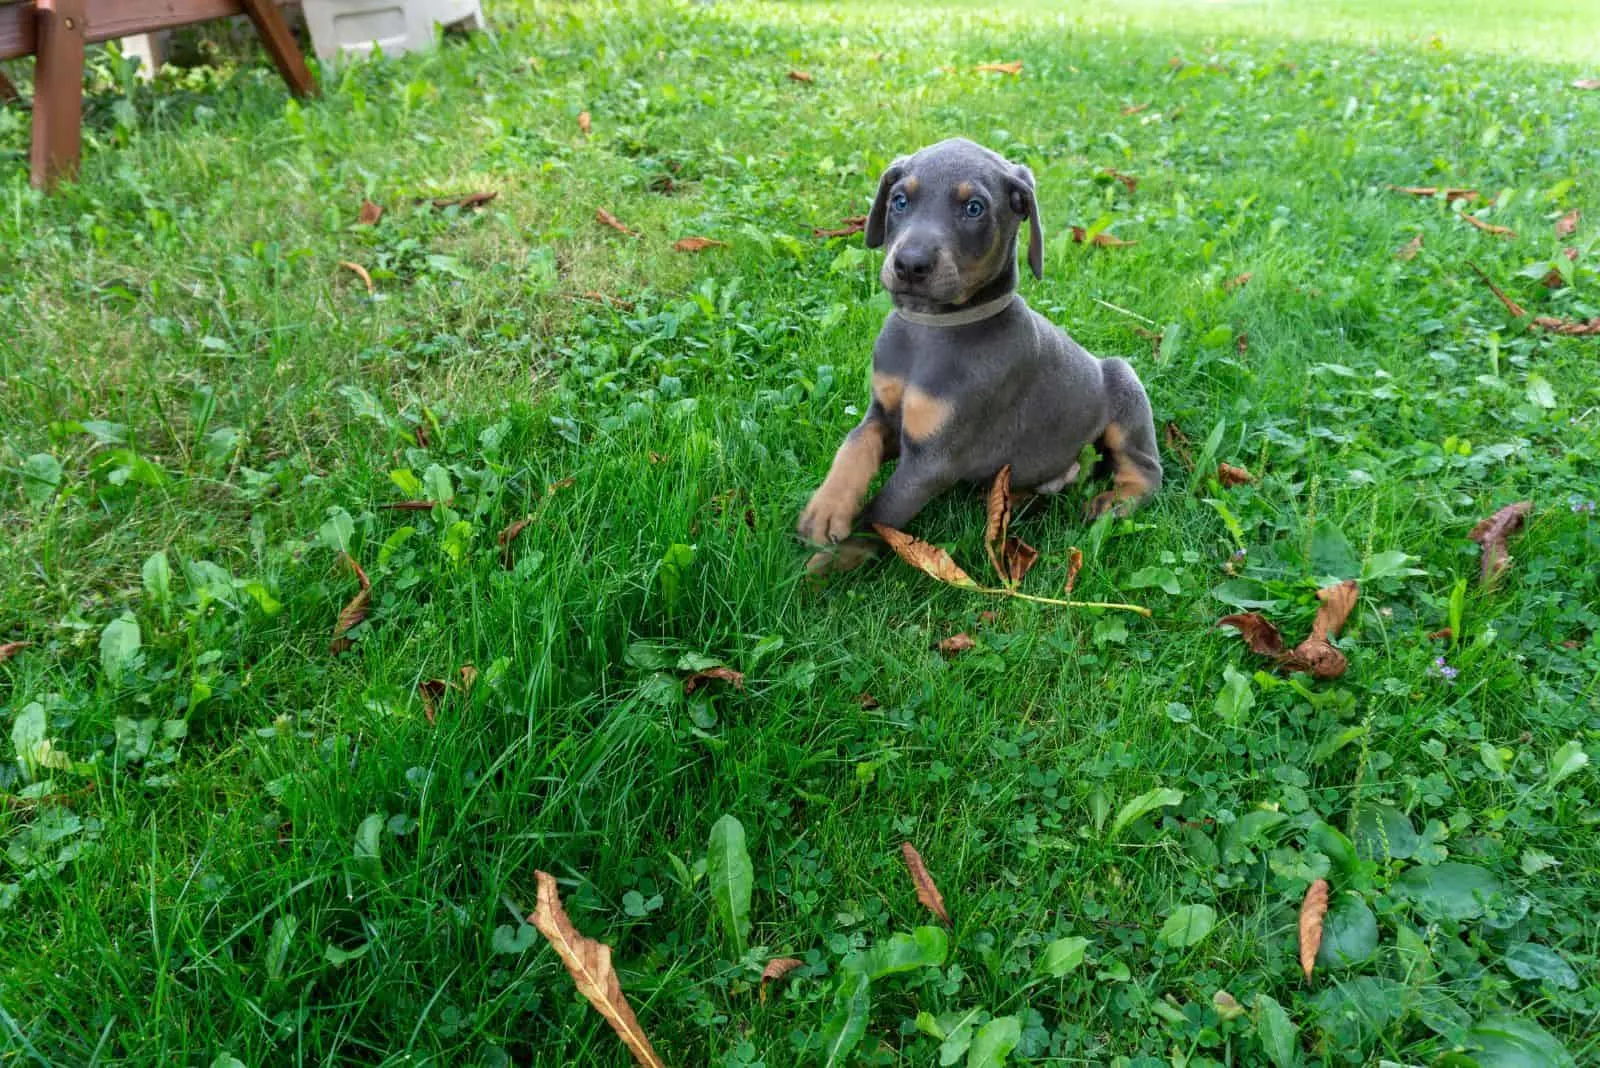 Doberman puppy is playing on the grass